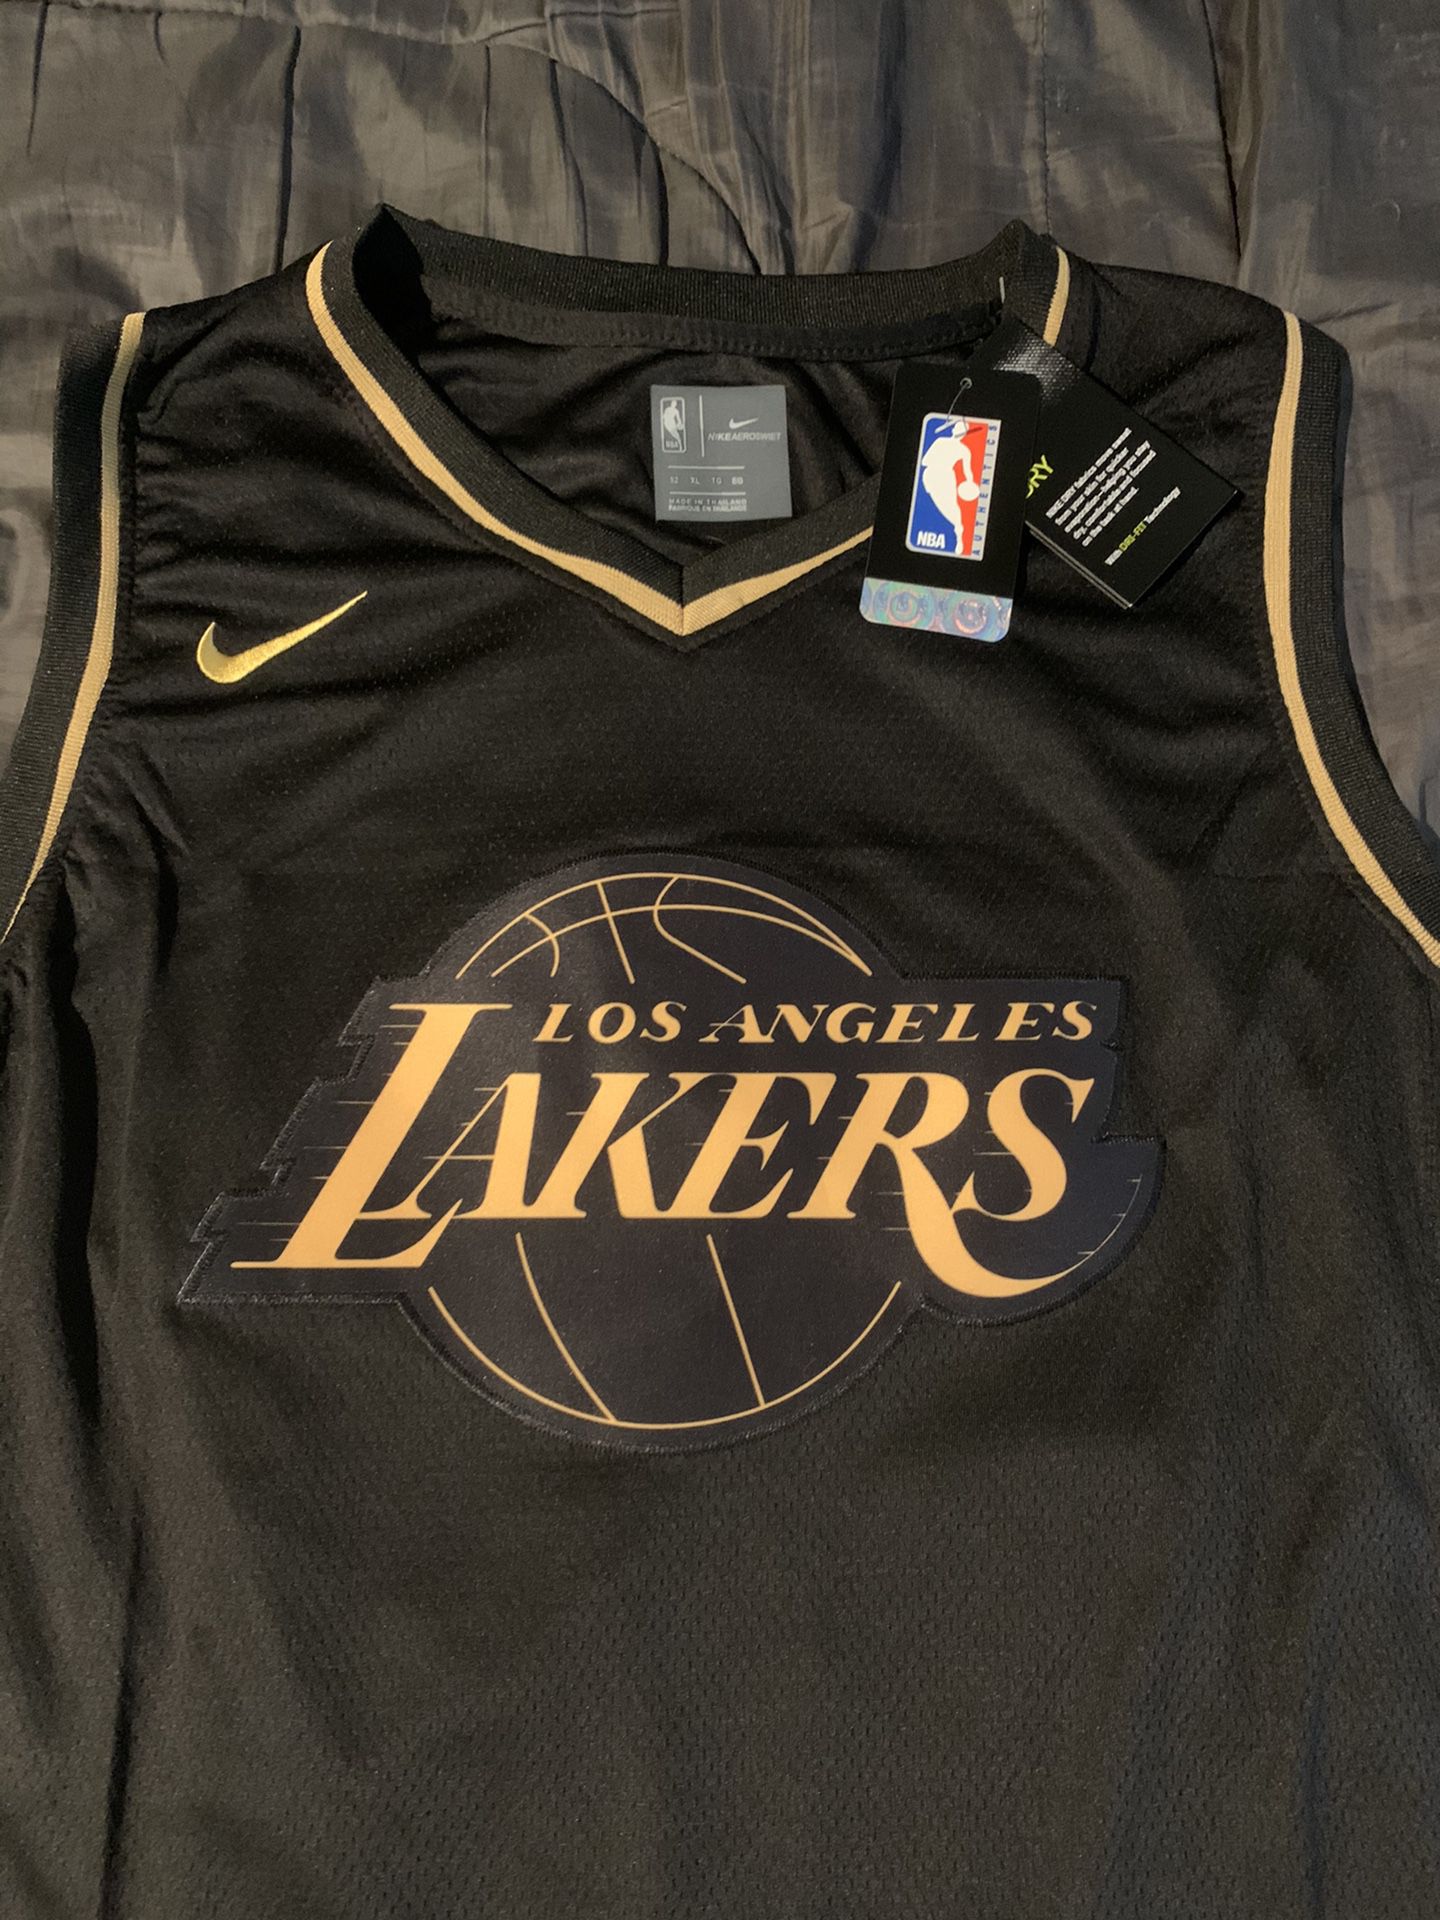 Mitchell & Ness Hardwood classic Kobe Jersey for Sale in Orland Park, IL -  OfferUp